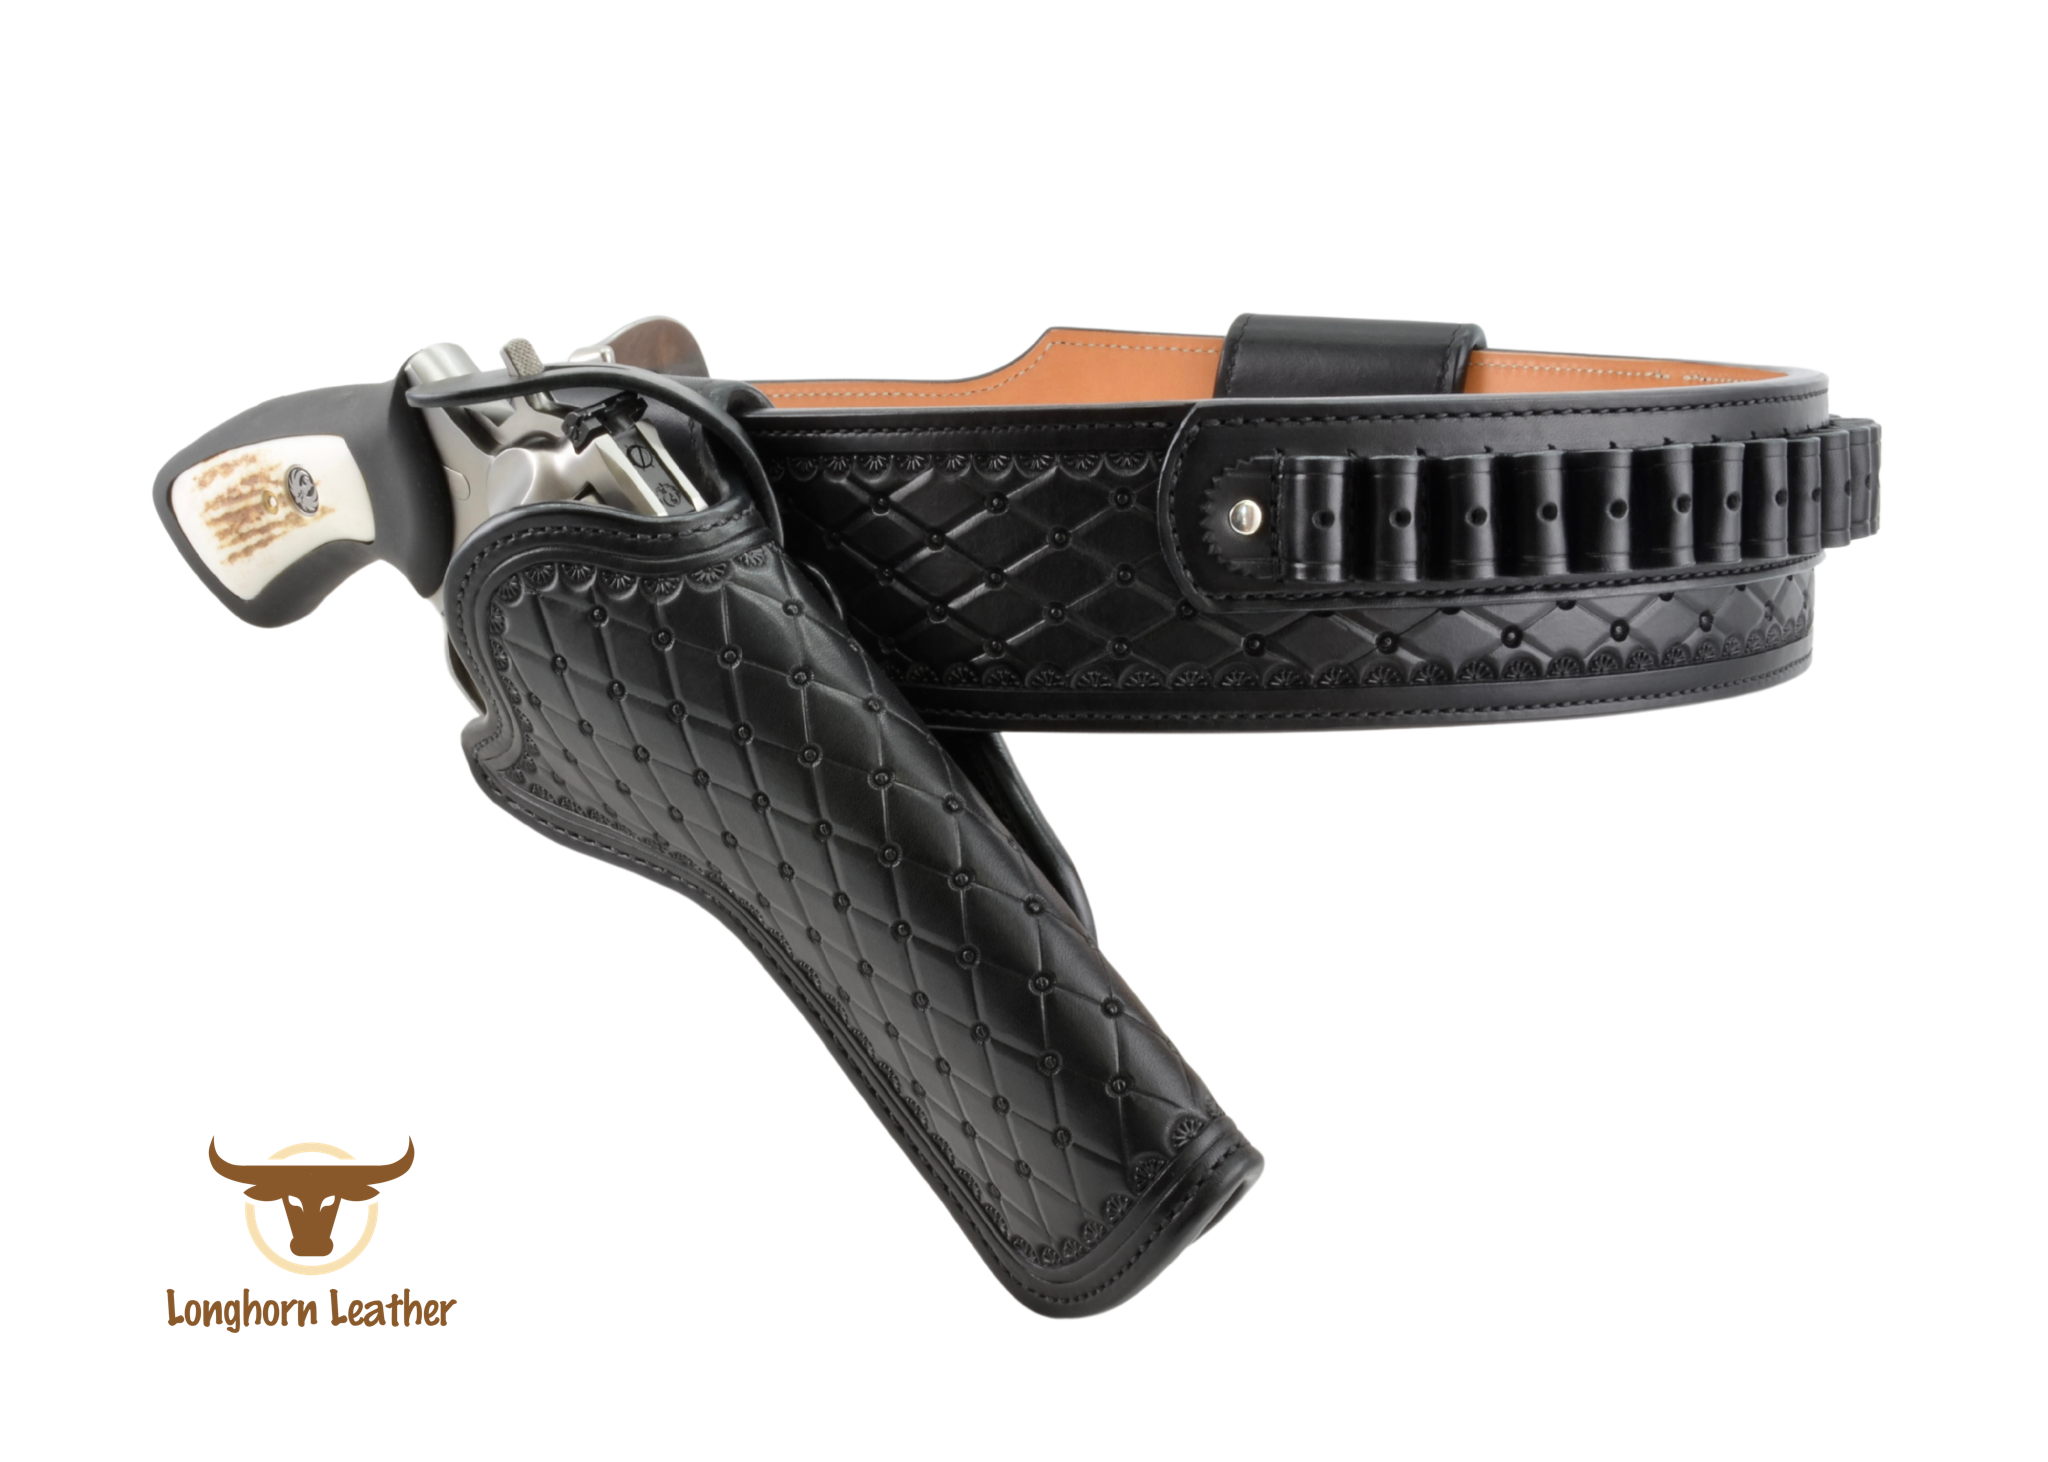 Custom leather Ruger GP100 cross draw holster and cartridge belt featuring the "San Carlos" design.  Individually handcrafted at Longhorn Leather AZ